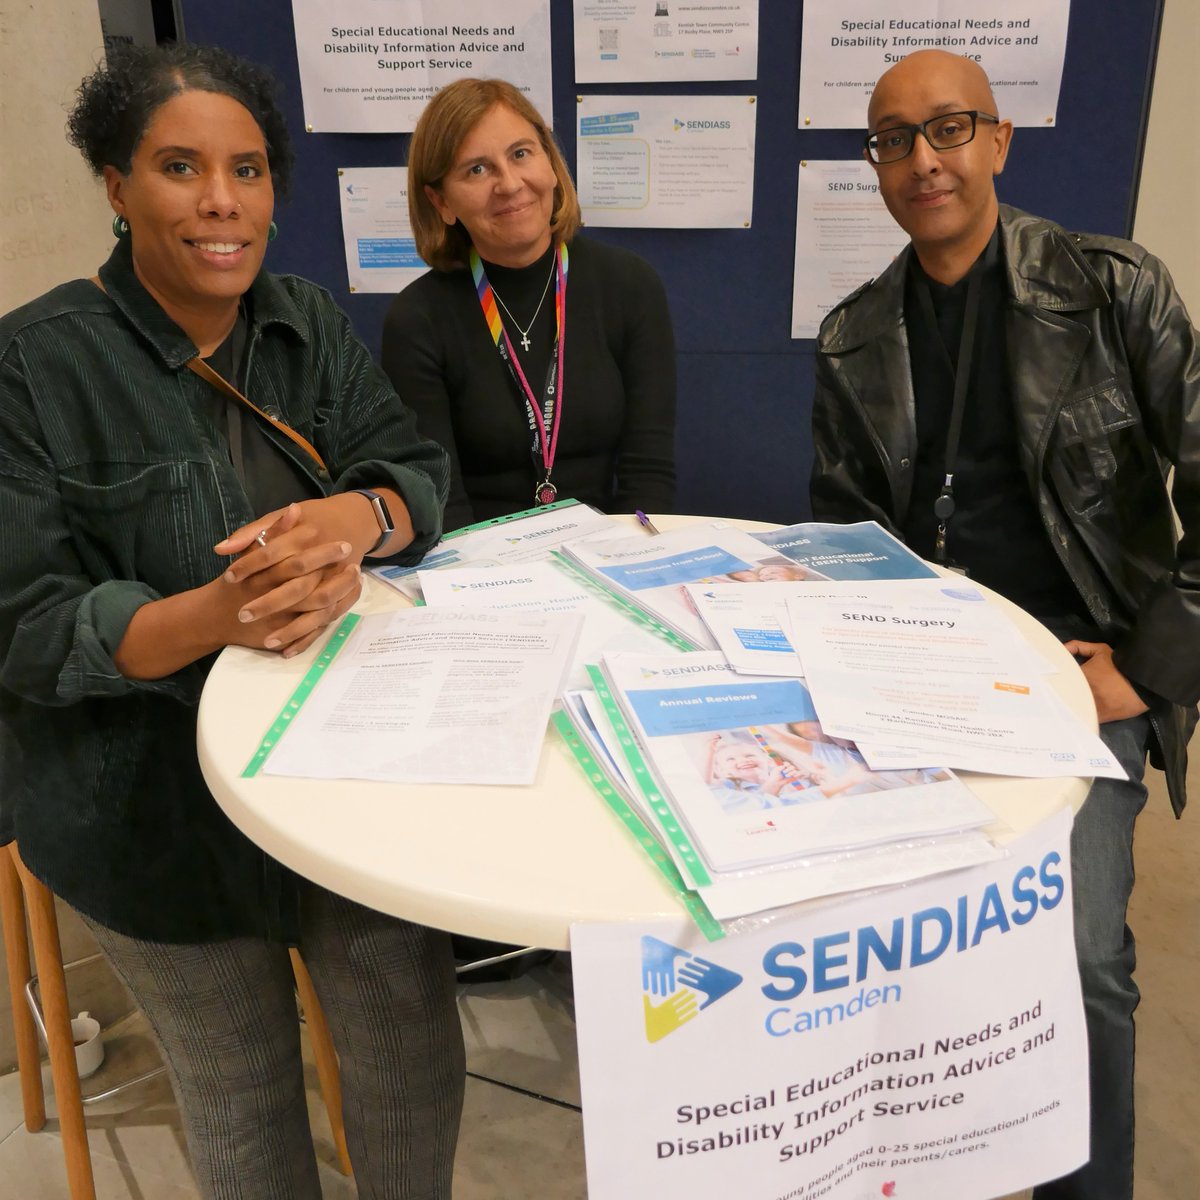 Parents and carers of children with SEND can get free and impartial support from Camden's SENDIASS team. Come along to the next drop-in session to speak to someone and ask any questions 👋 🗓️ Tuesday 6th February, 9.30am – 12pm 📍 Harmood Children’s Centre & Family Hub, NW1 8DQ